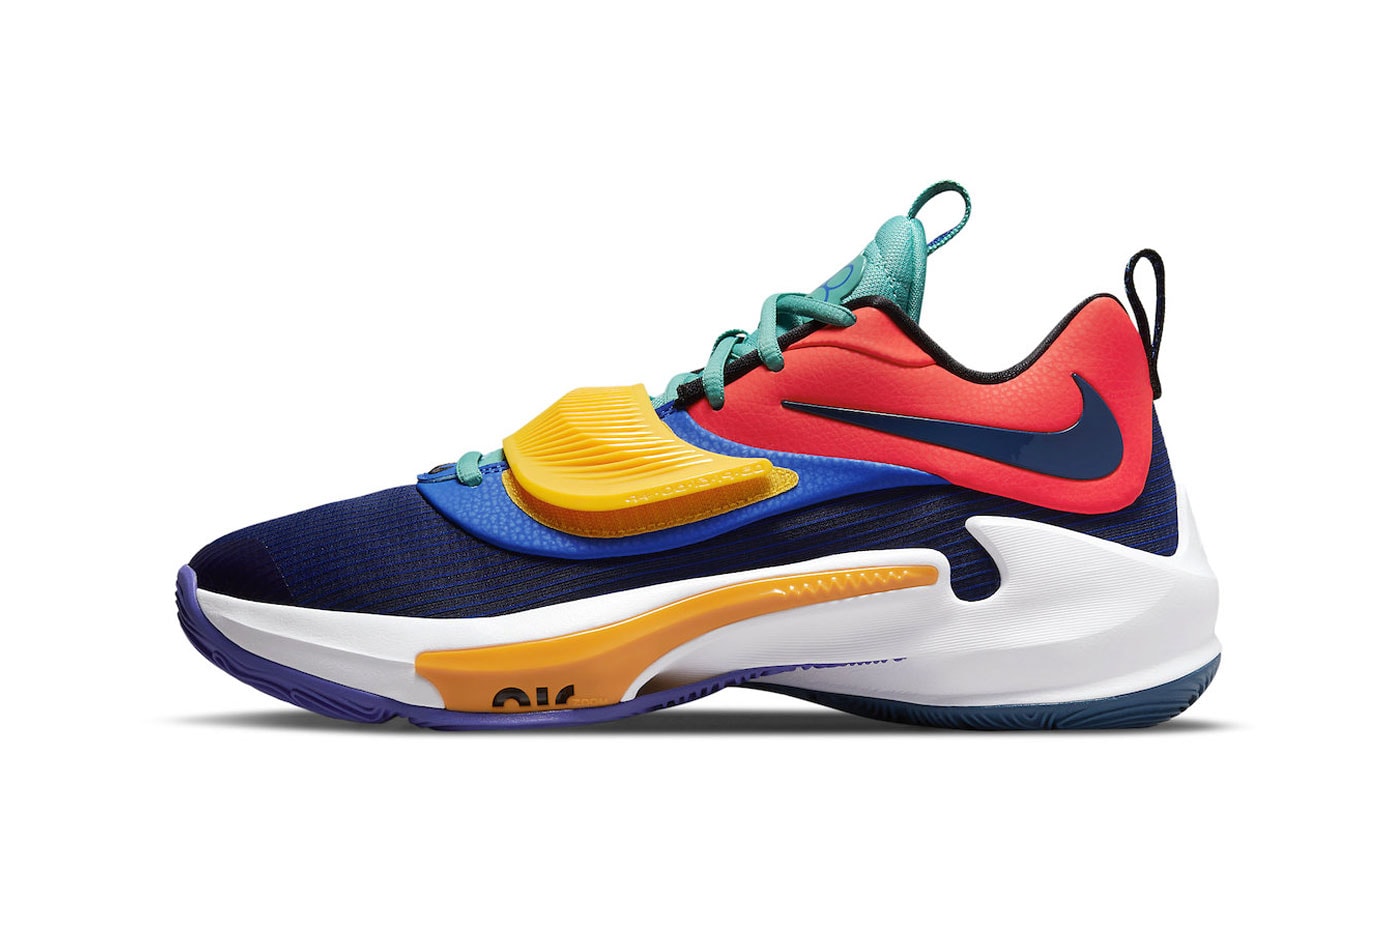 Official Images of the Nike Zoom Freak 3 